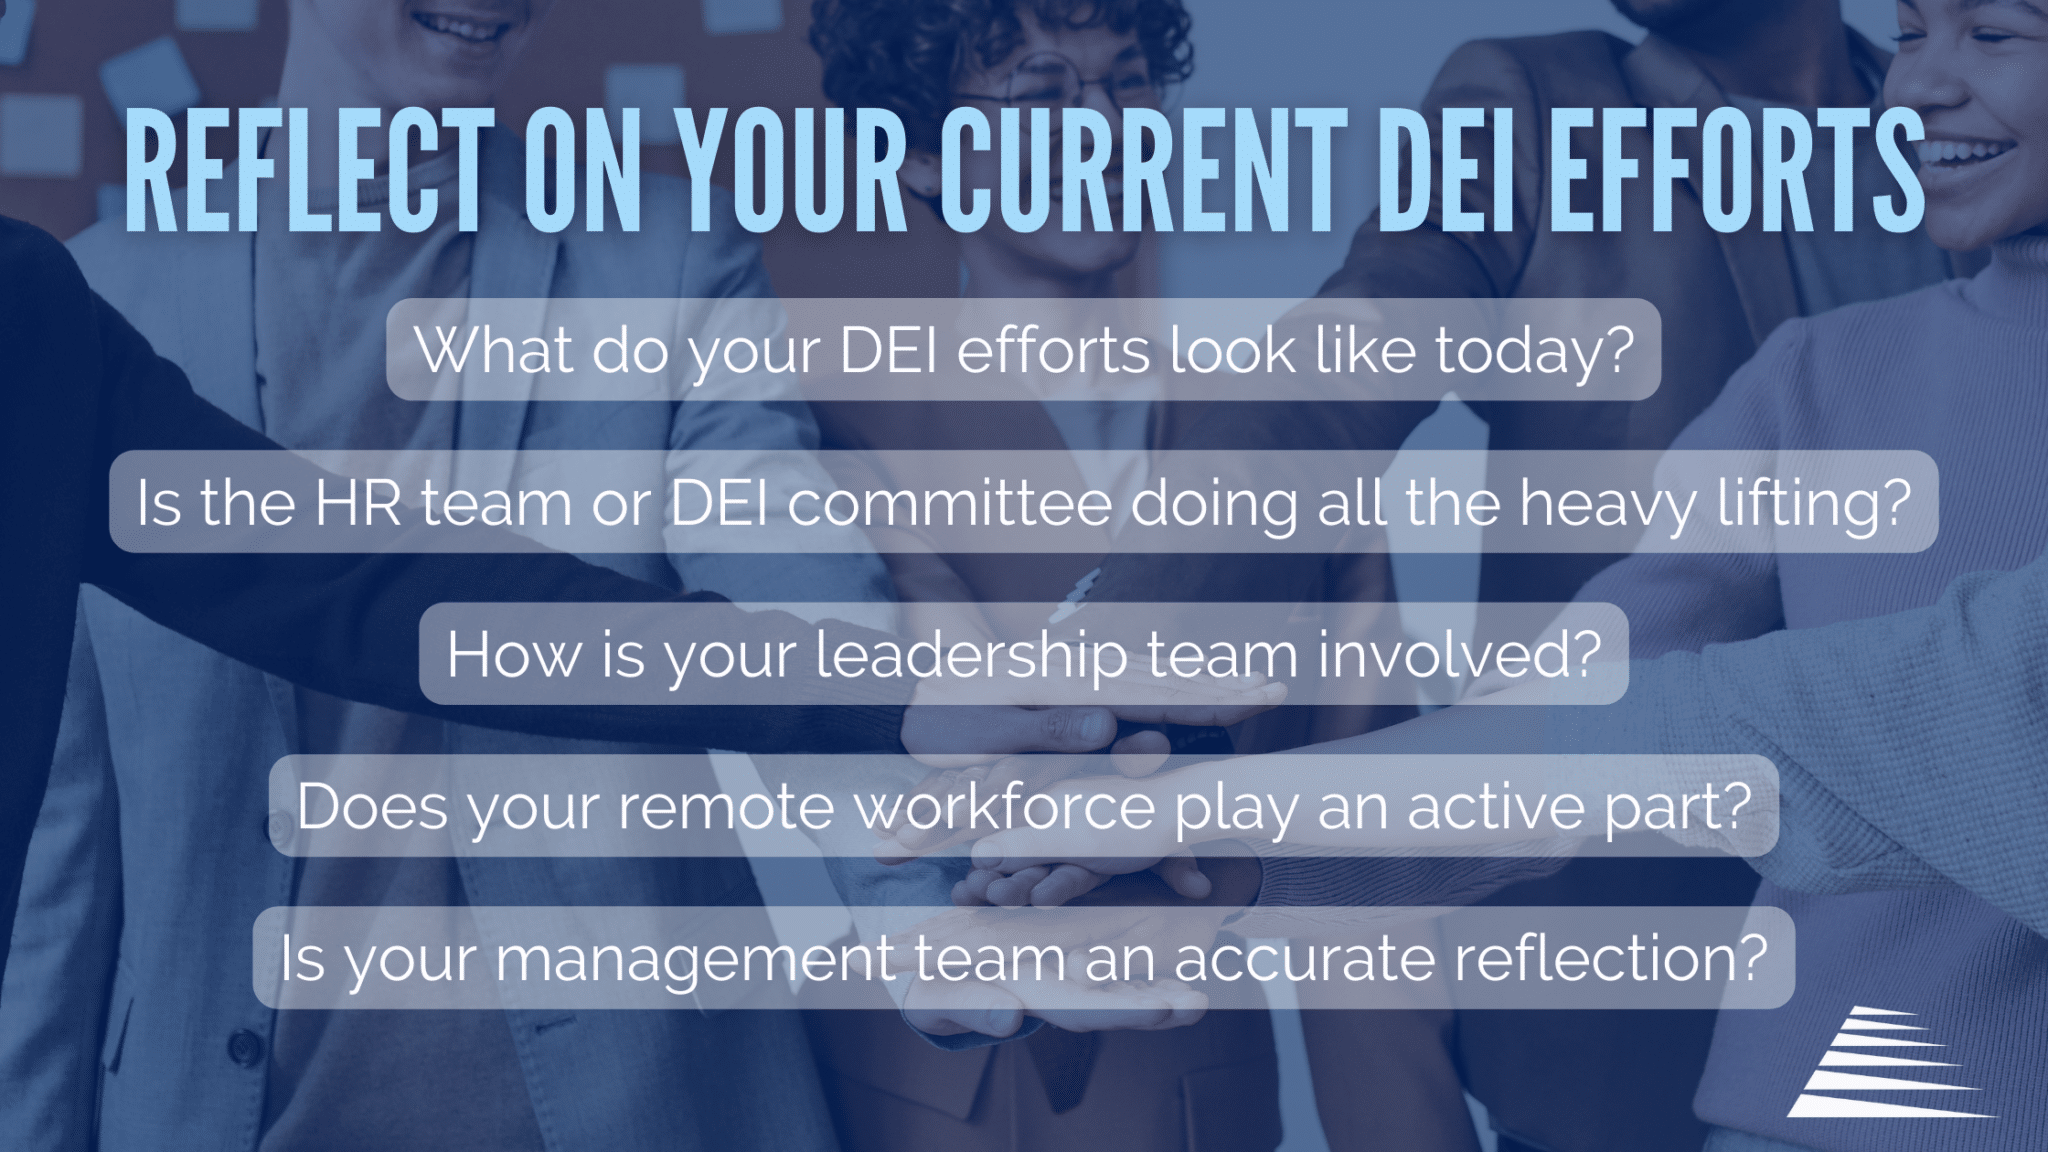 Graphic titled "Reflect on your current DEI efforts" with 5 questions listed below. Backround image of coworkers putting their hands together in a group.